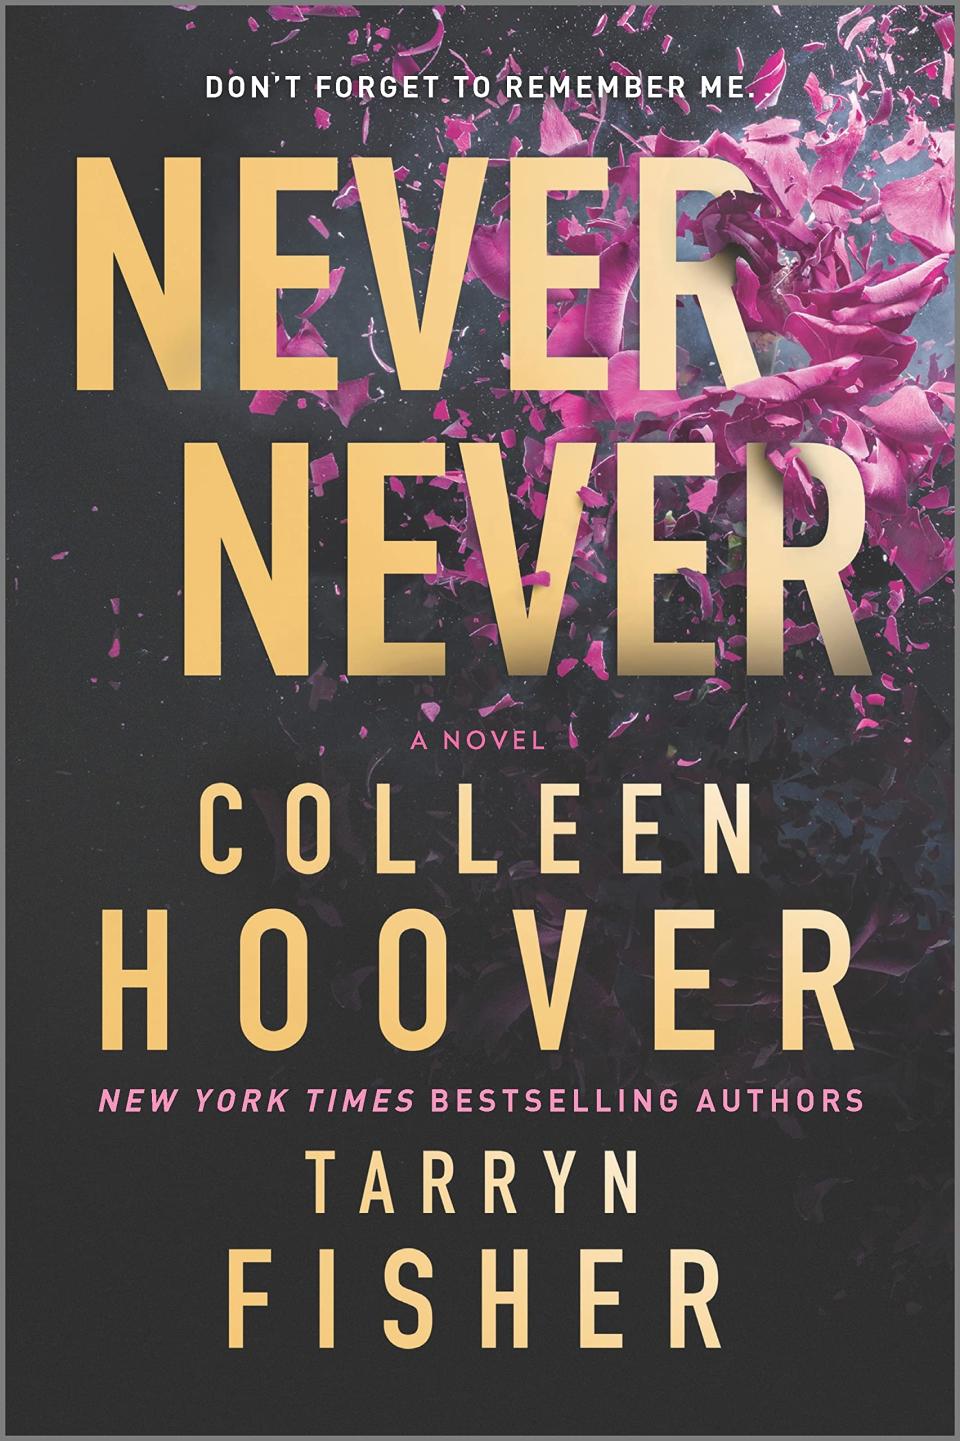 Colleen Hoover and Tarryn Fisher's new thriller 'Never Never' tops must